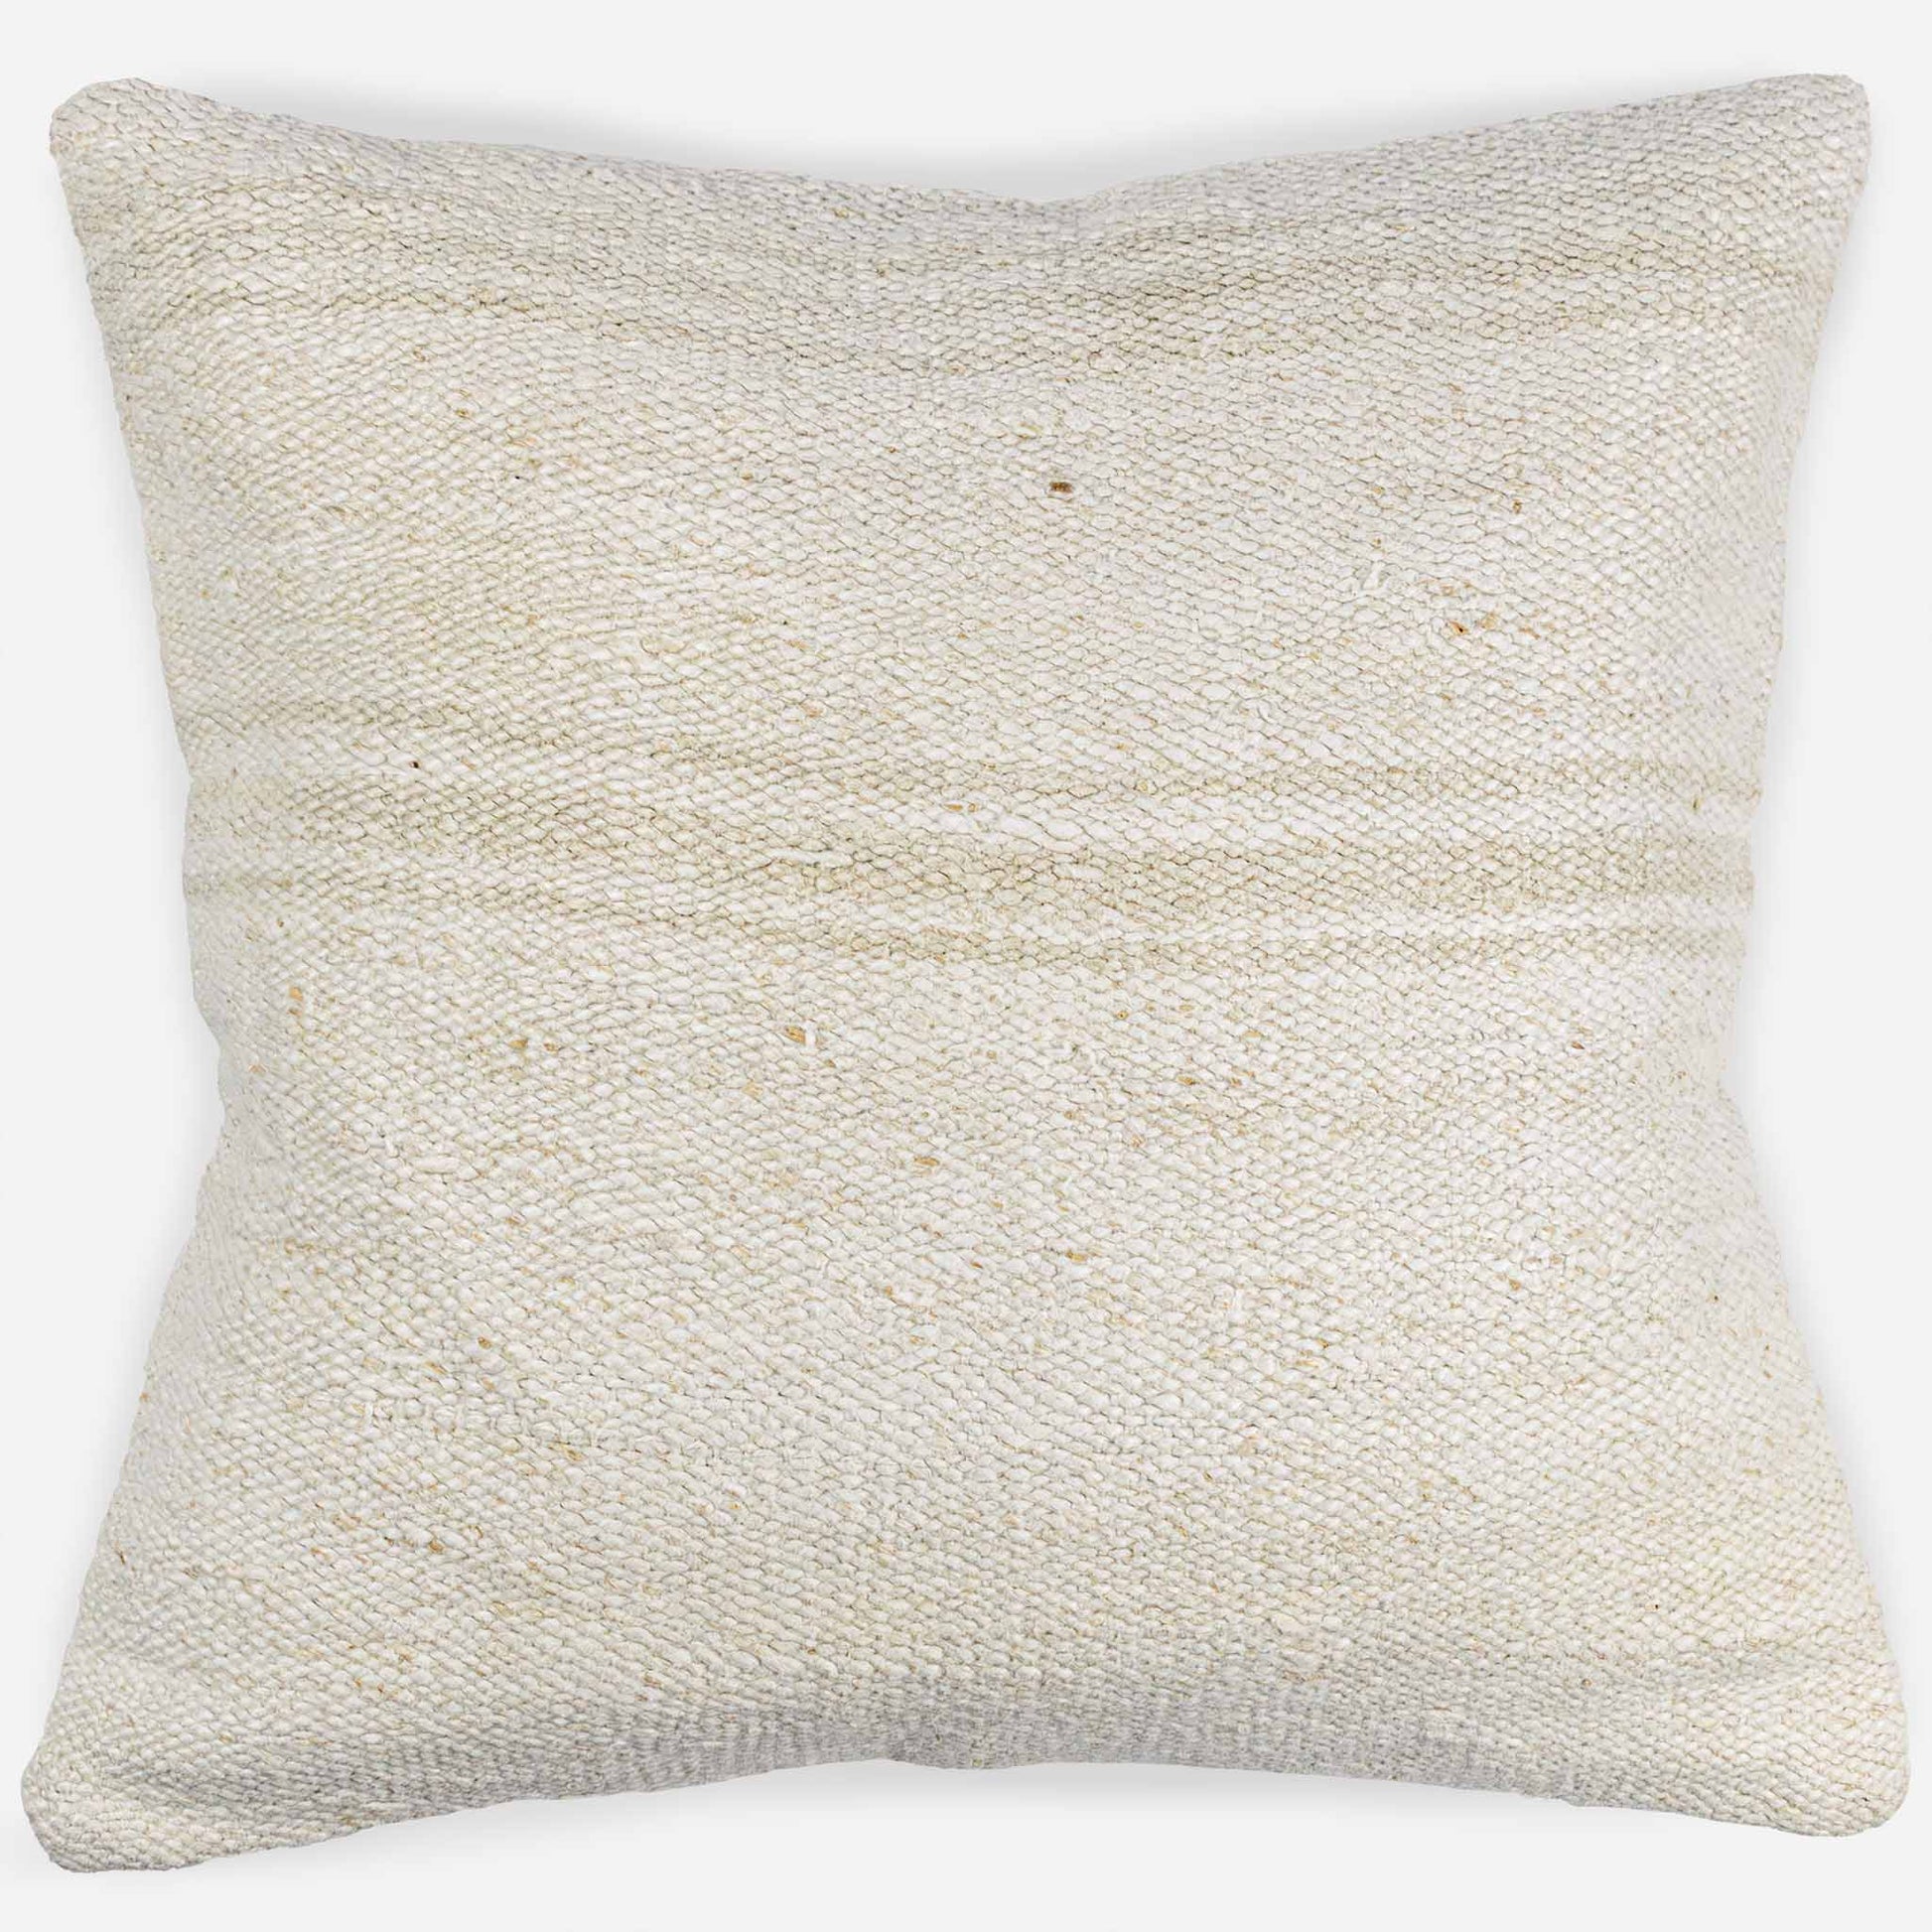 Handwoven Turkish kilim sisal pillow cover in ivory white with light stripes.